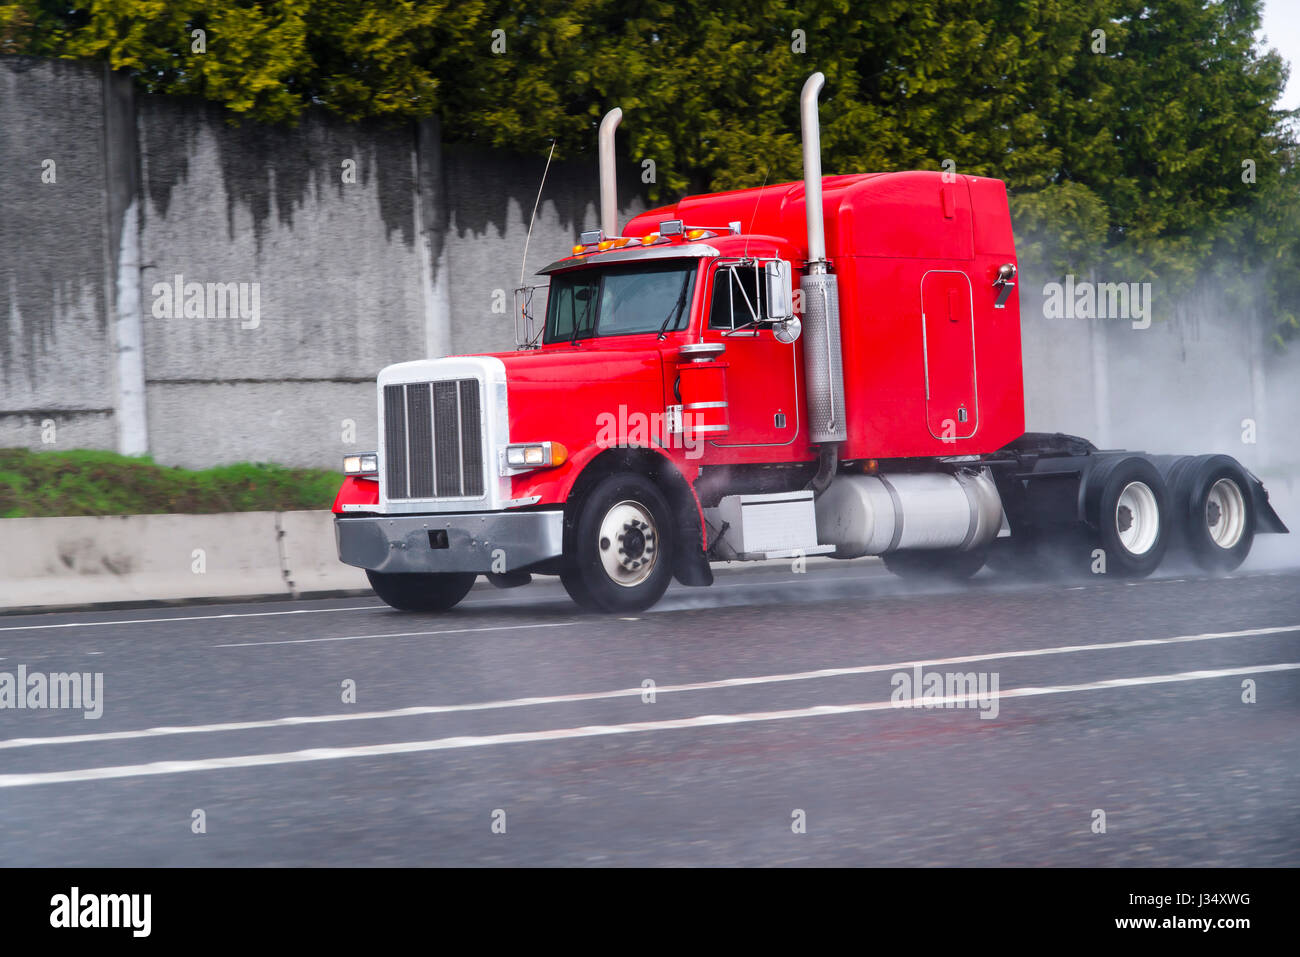 Professional classical bonnet red semi-truck with a long cab and vertical exhaust pipes drive on highway with multiple lanes, raising by wheels Stock Photo